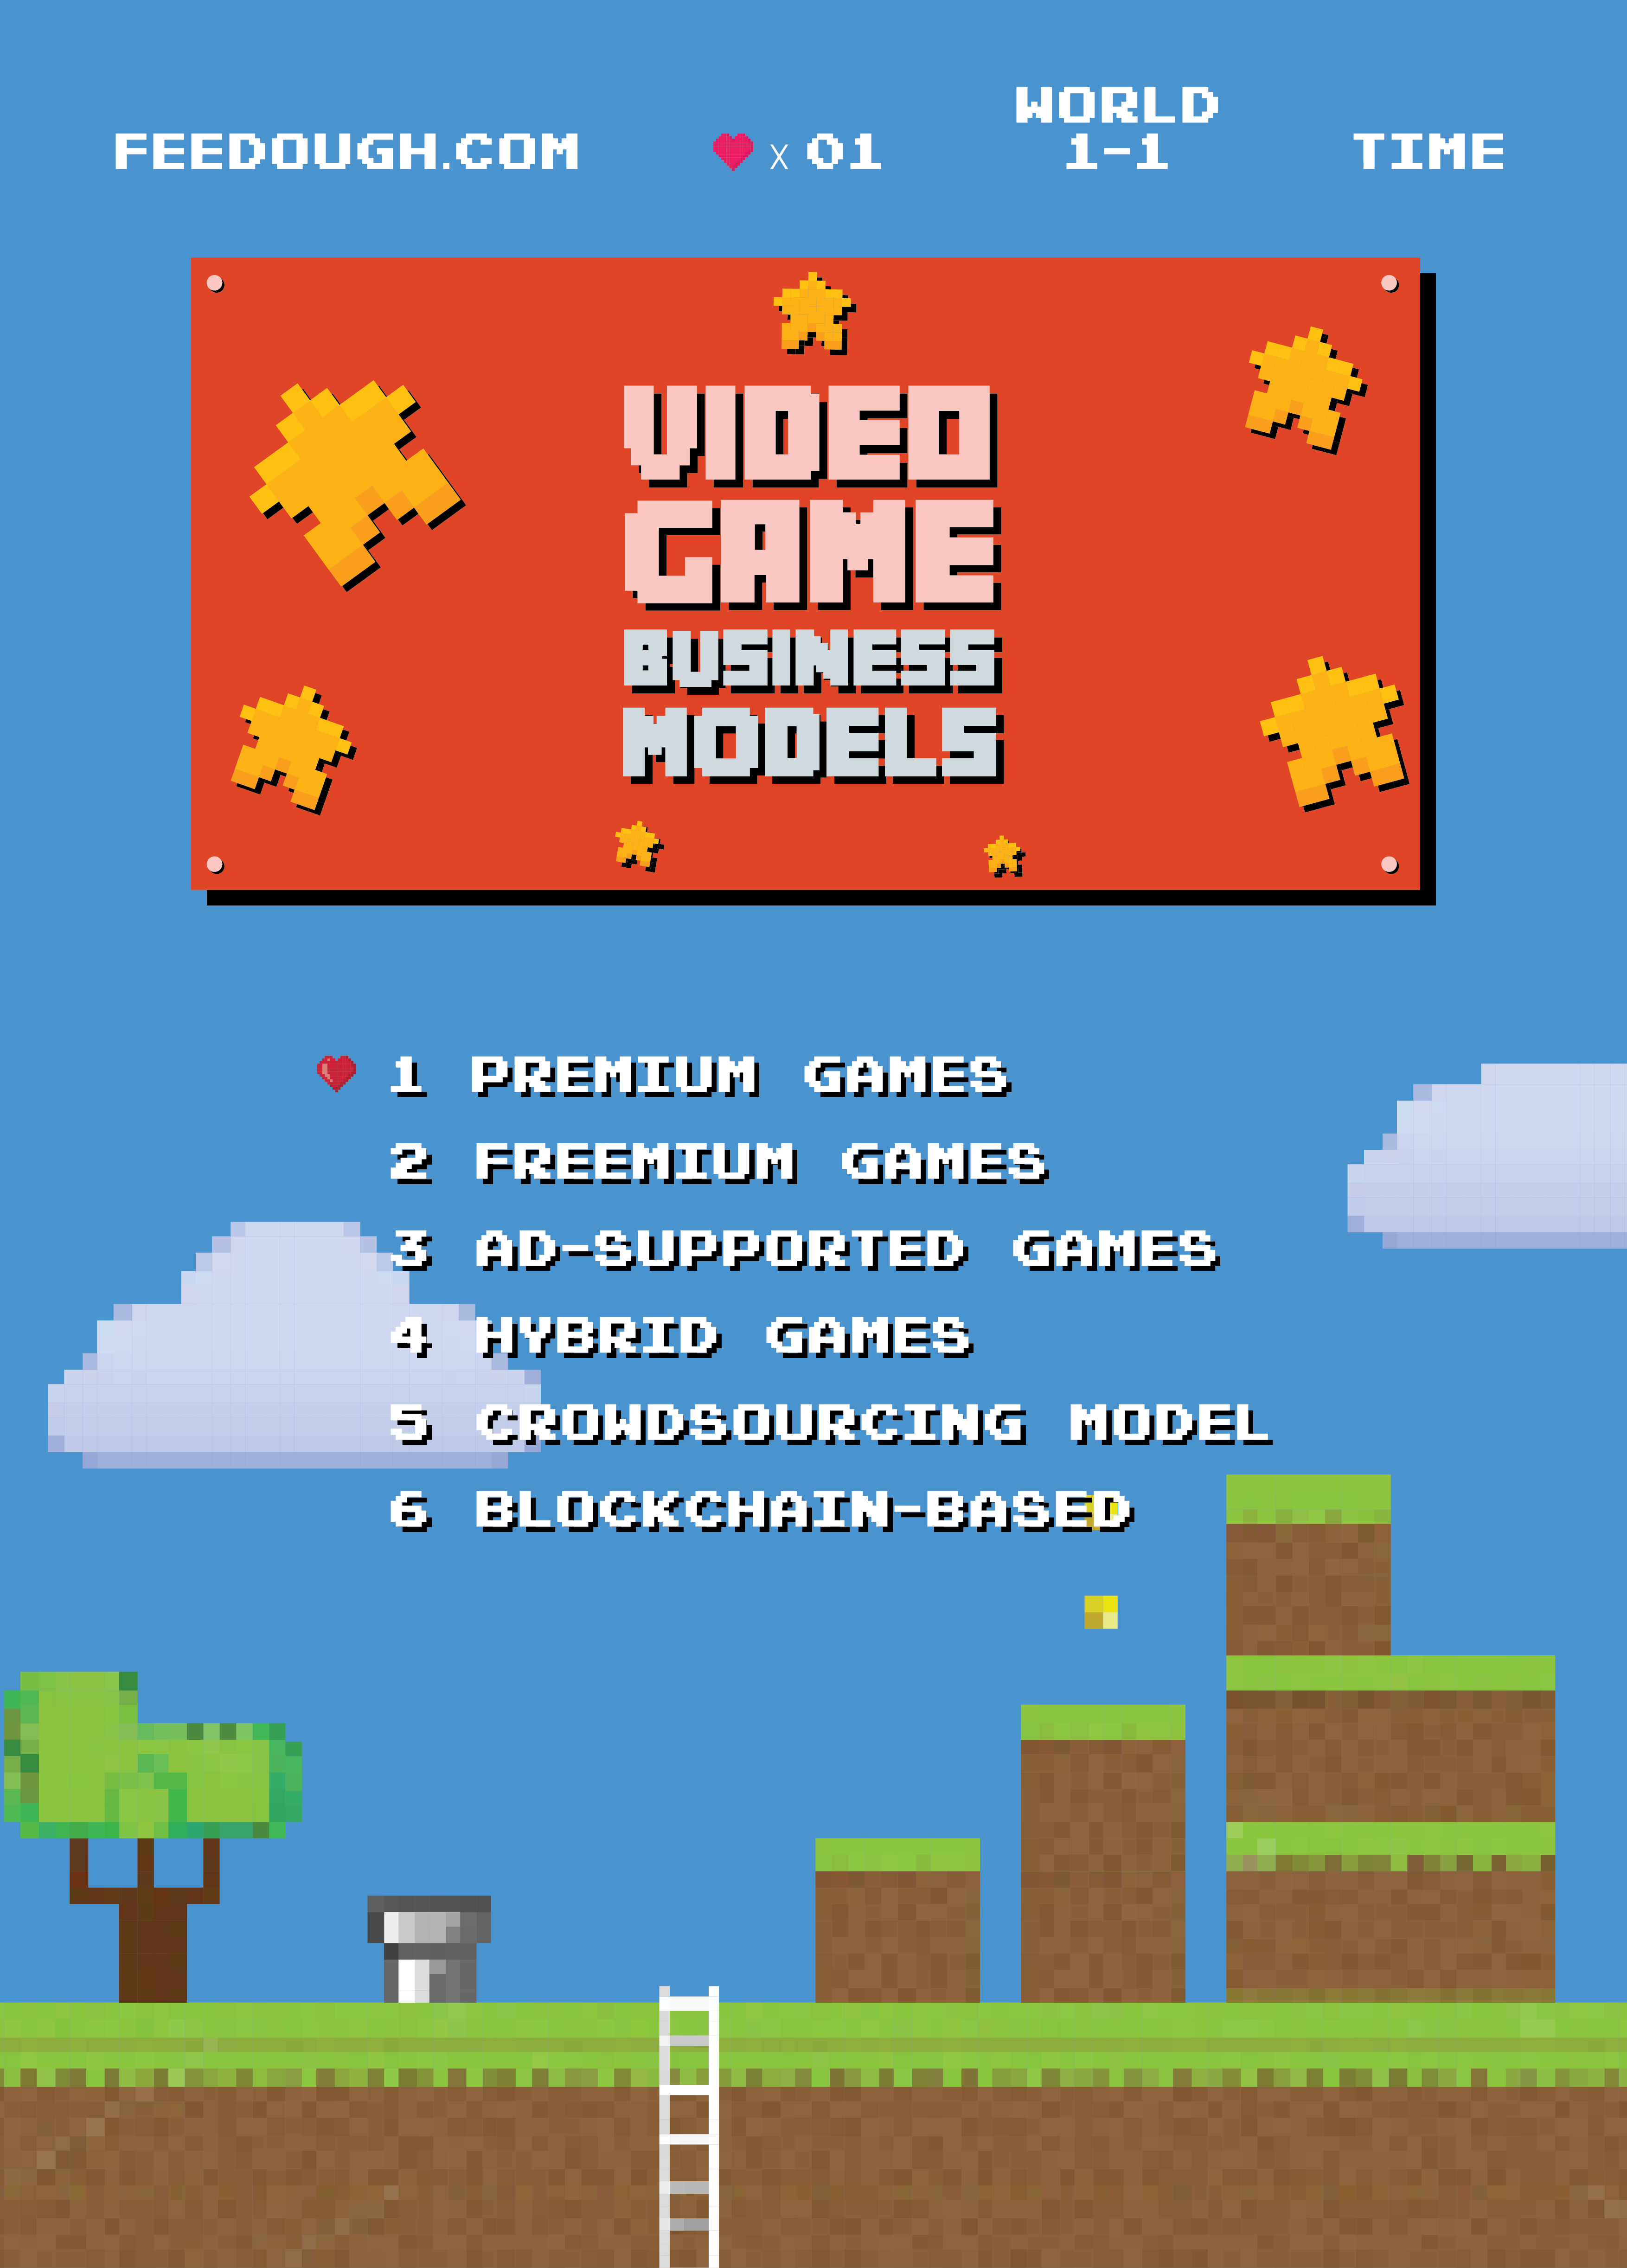 game business models infographic